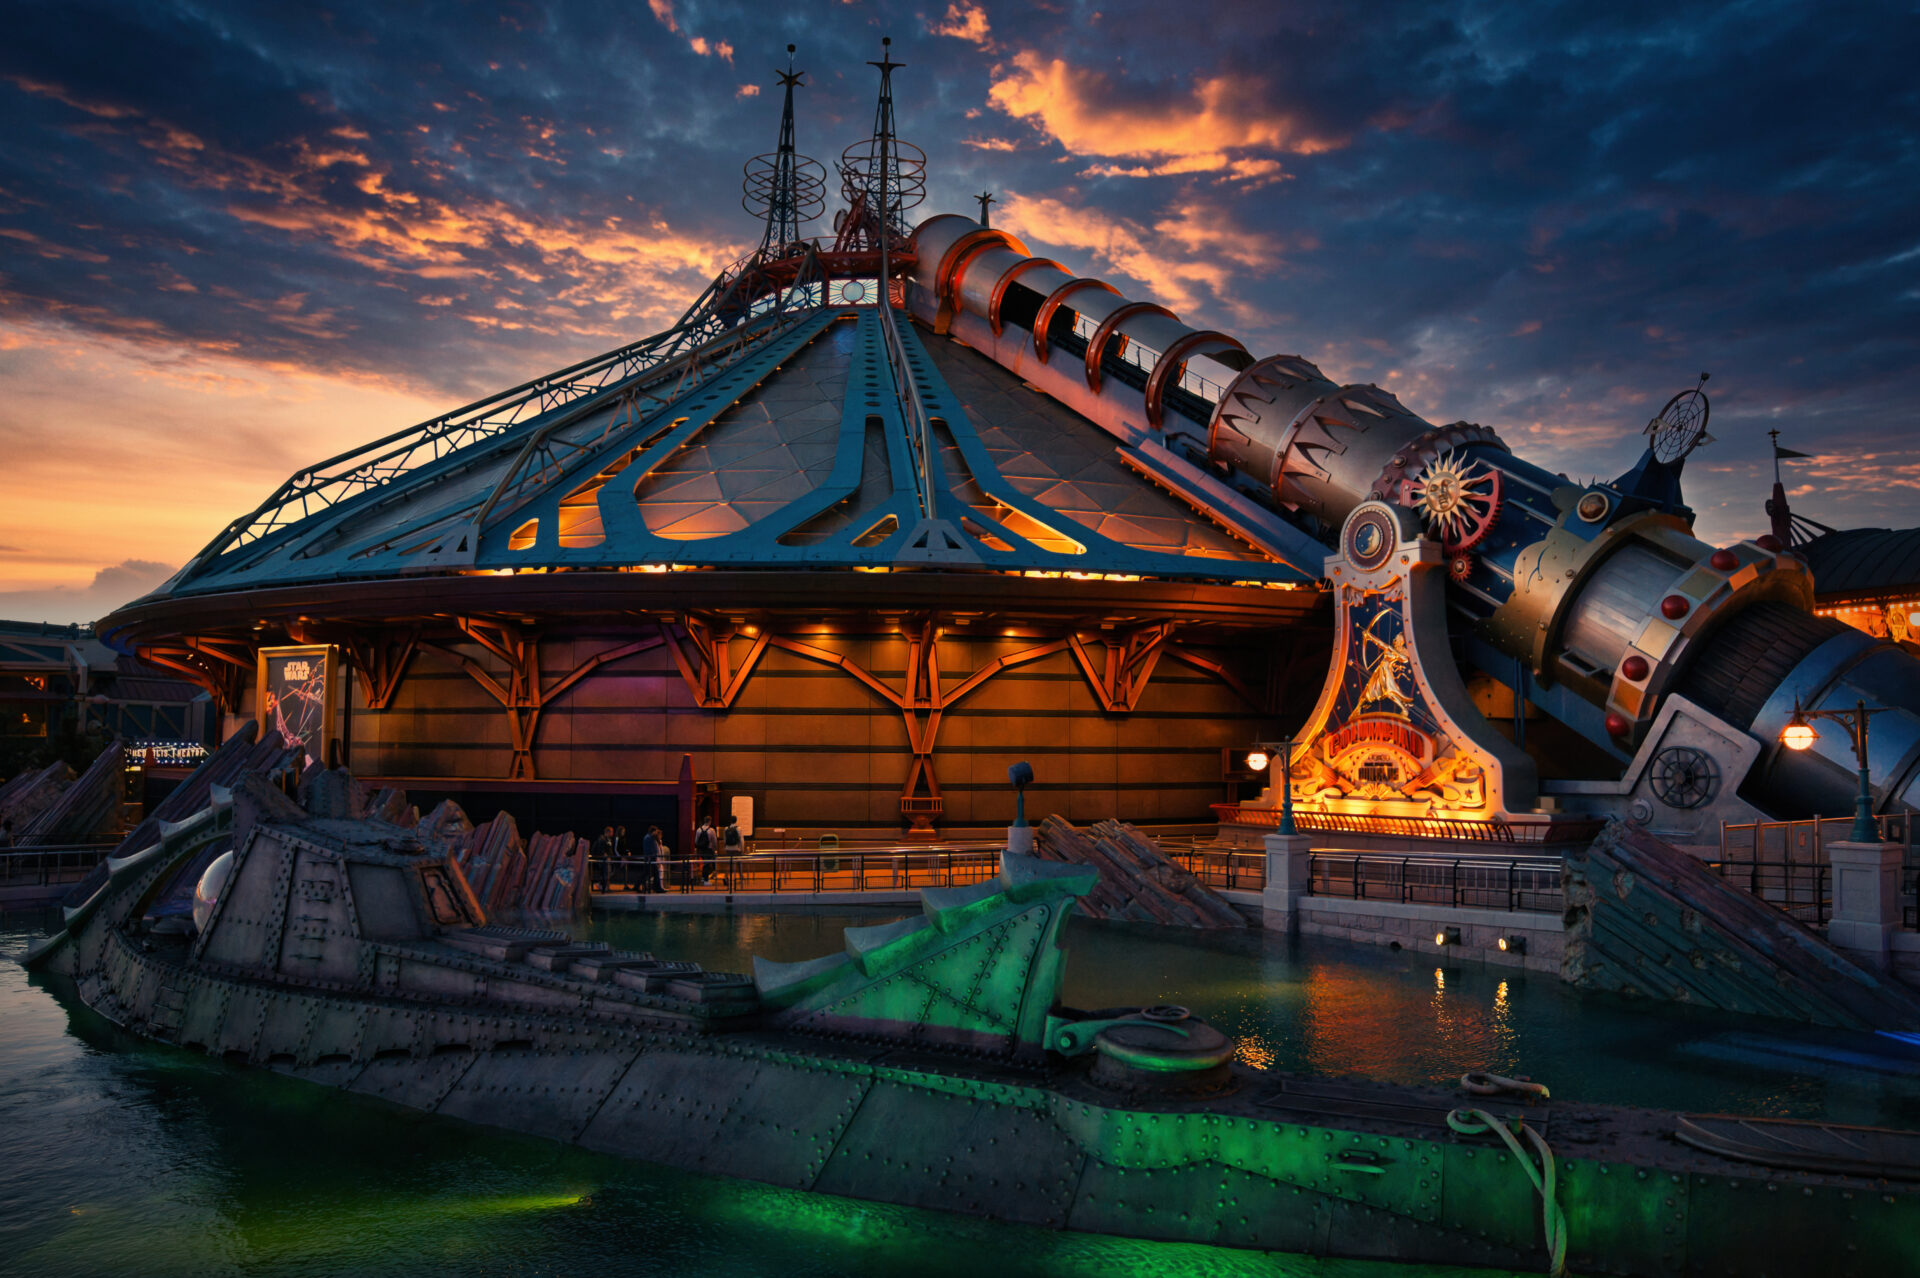 Space Mountain Disneyland Paris Hyper Sunset Discoveryland Canon Jules Verne From the Earth to the Moon Night